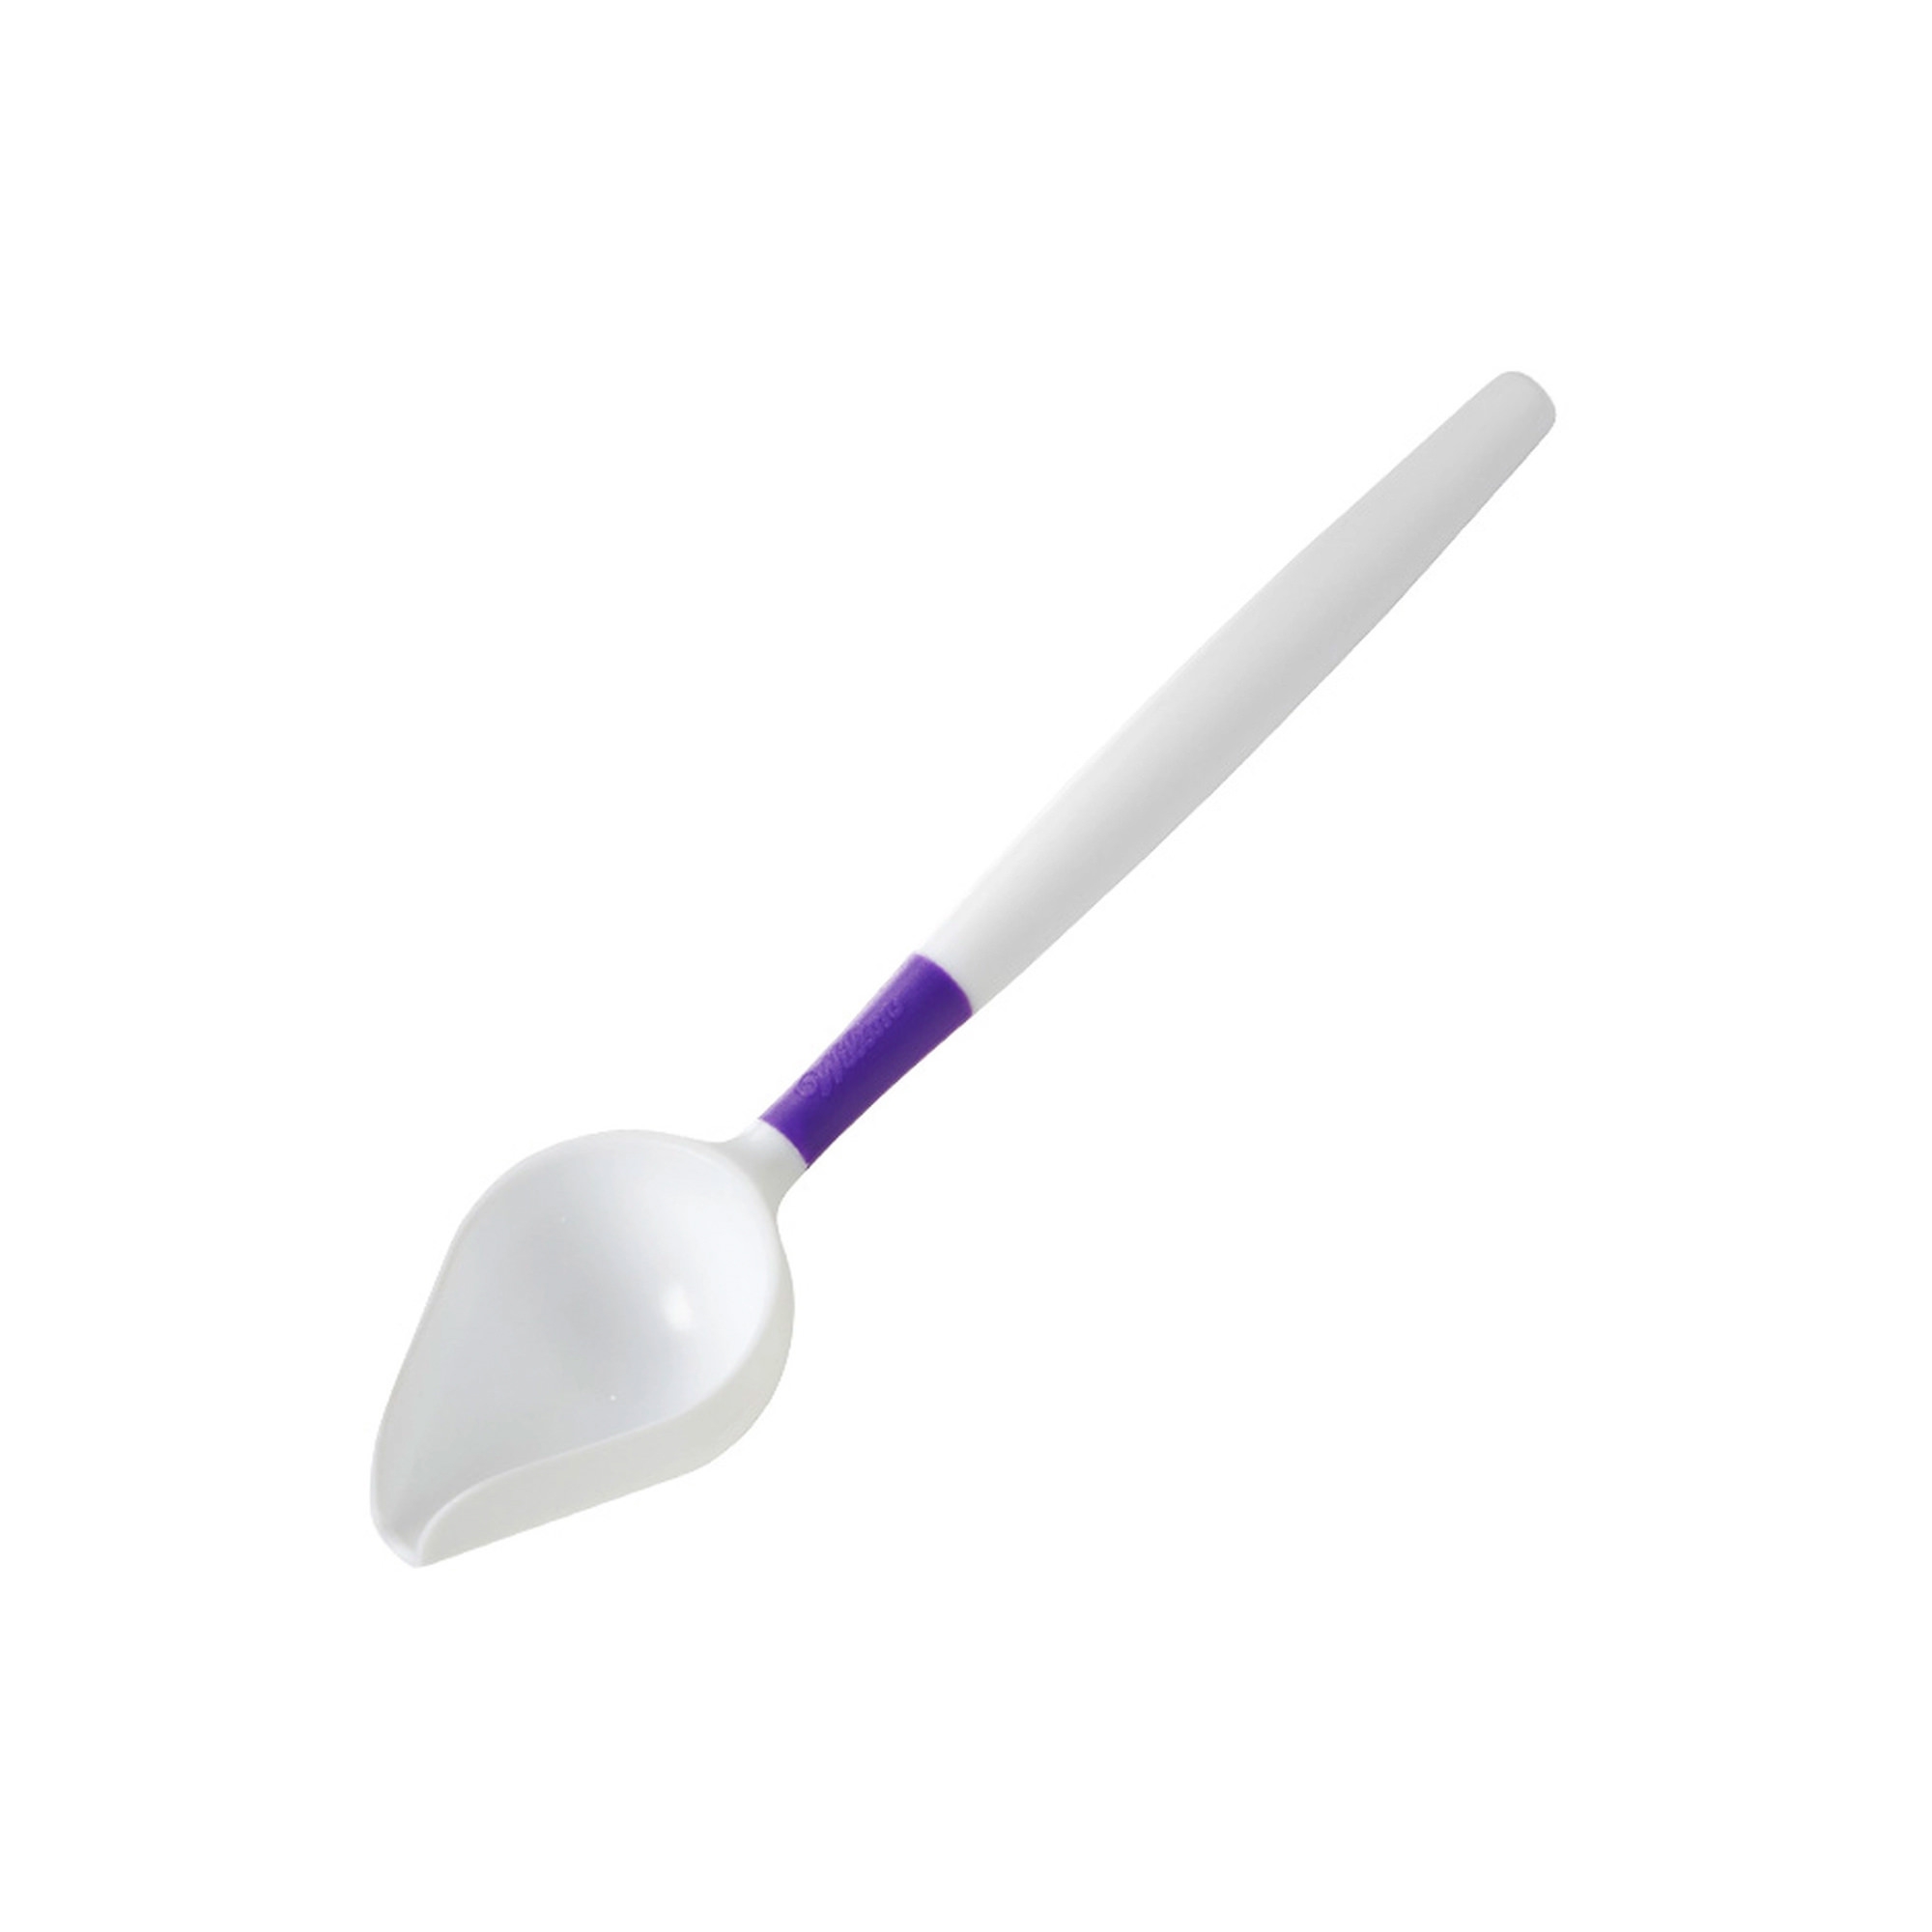 Wilton Candy Melts Drizzling Scoop Image 1